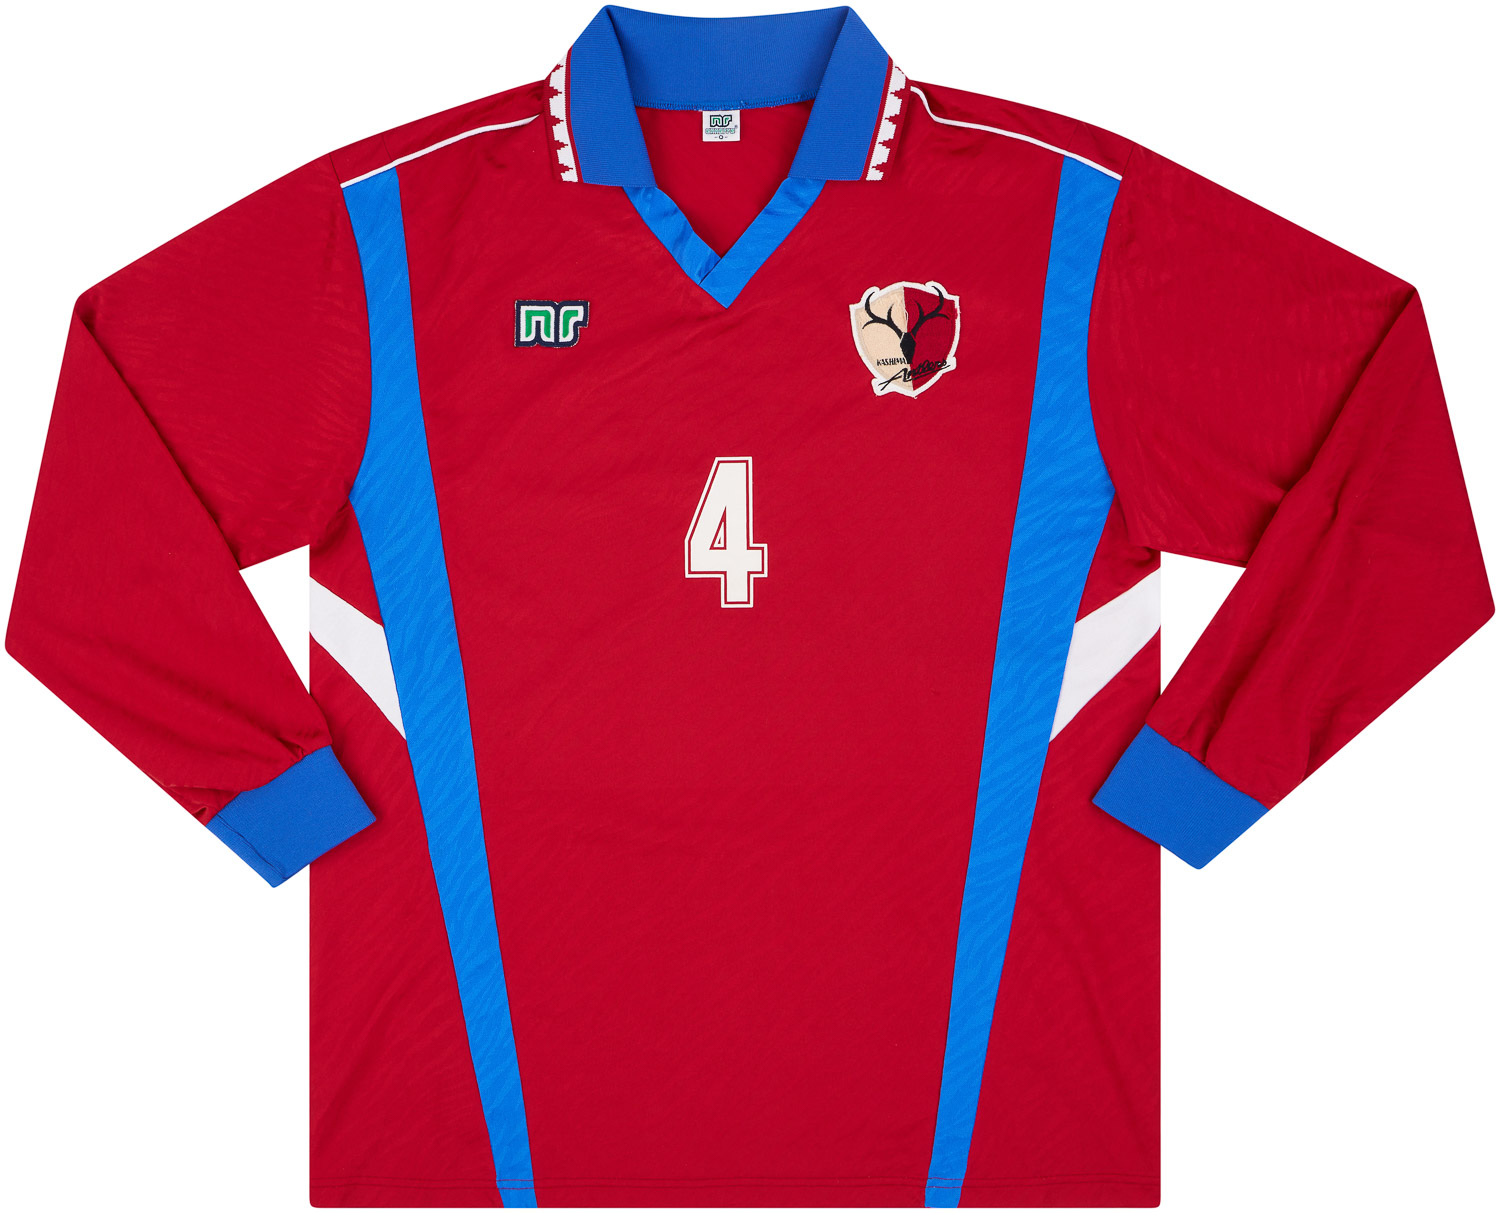 1992 Kashima Antlers Match Issue Home LS Shirt #4